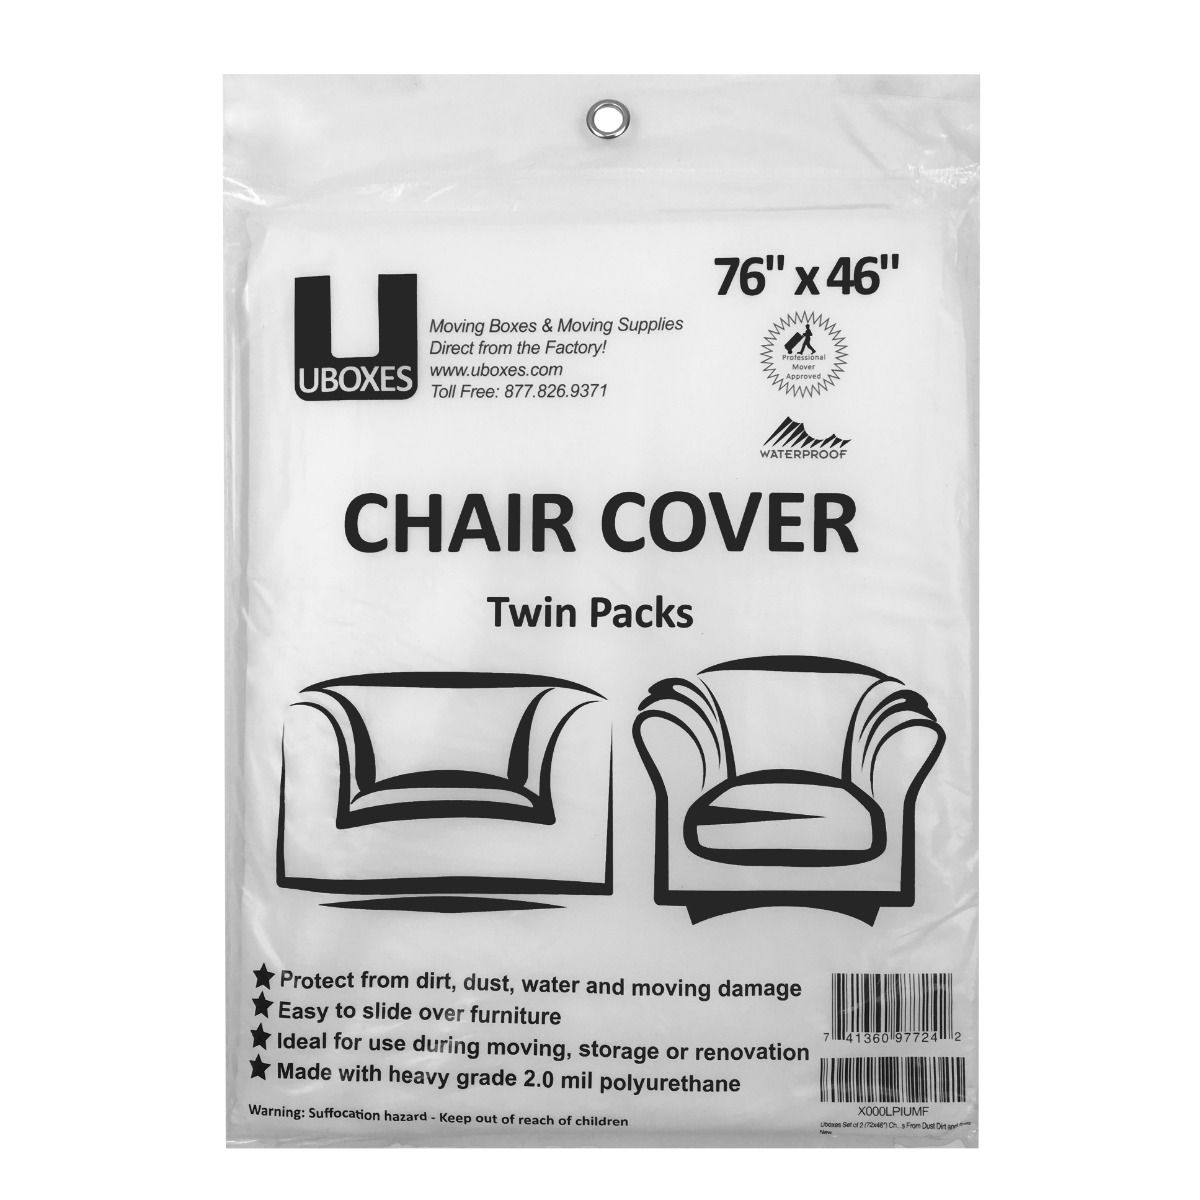 package of 2 NEW Chair covers for moving & storage protection from dust etc 